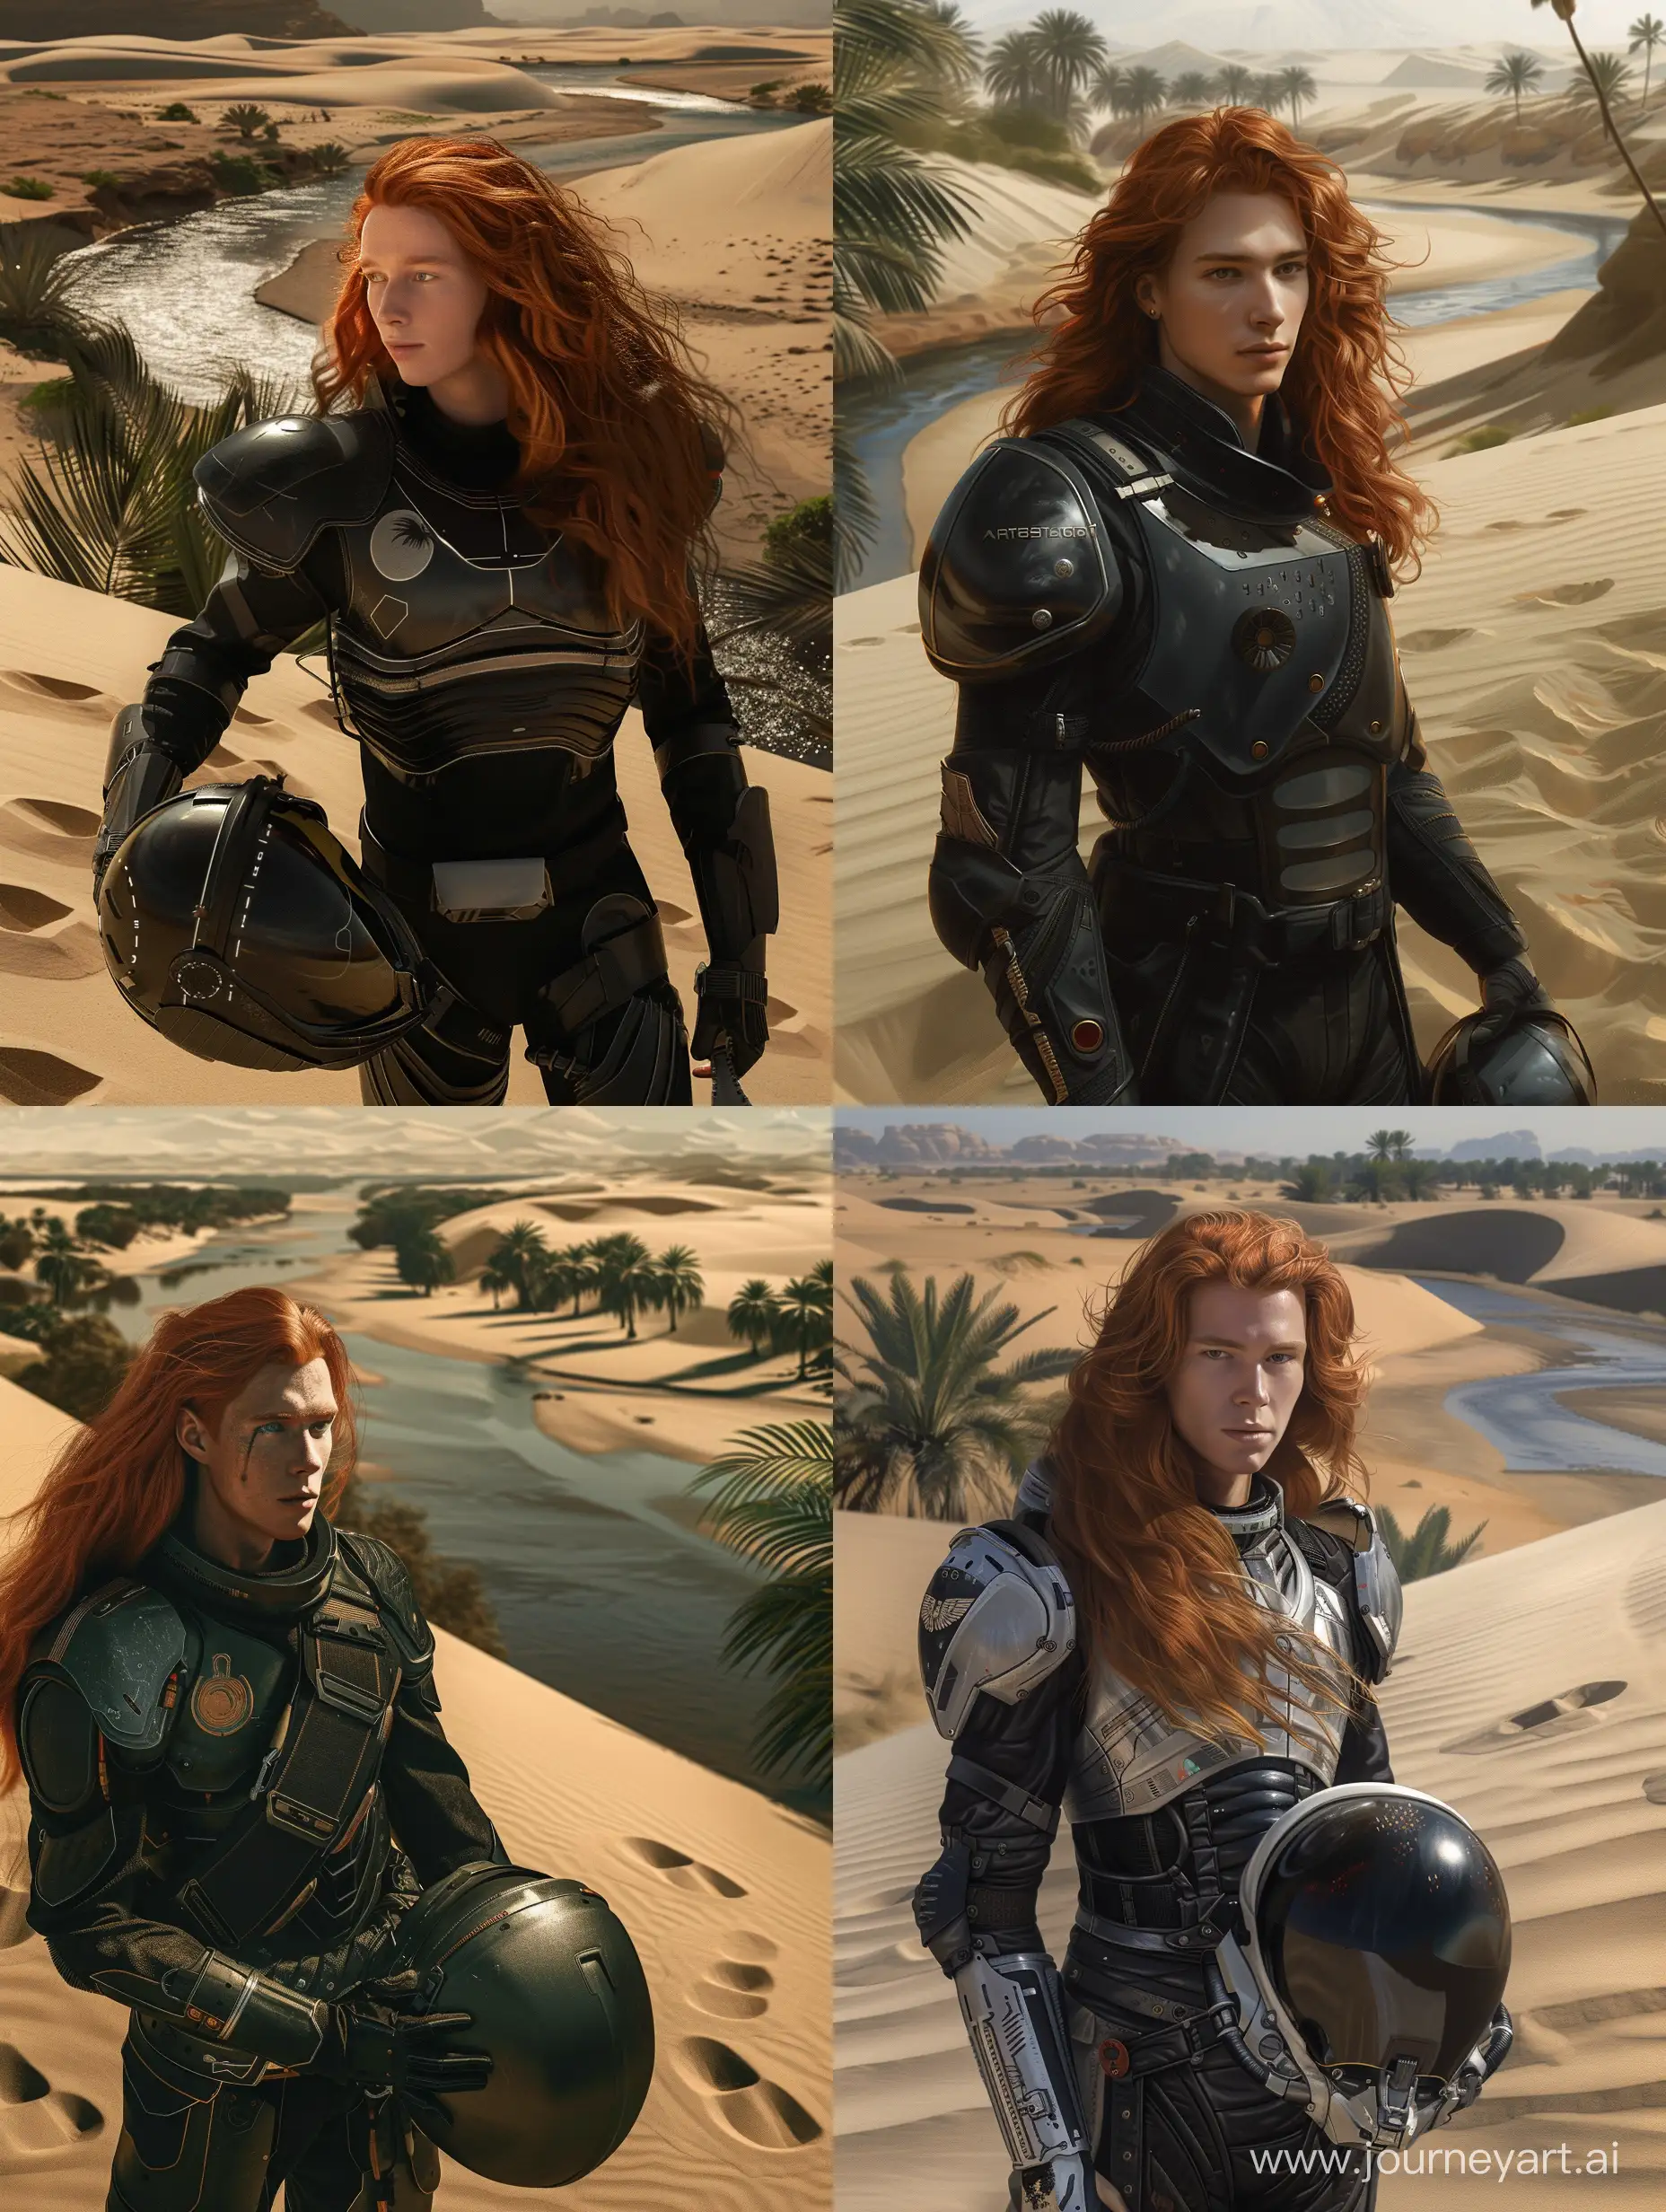 RedHaired-Space-Warrior-with-Helmet-Amidst-Desert-Oasis